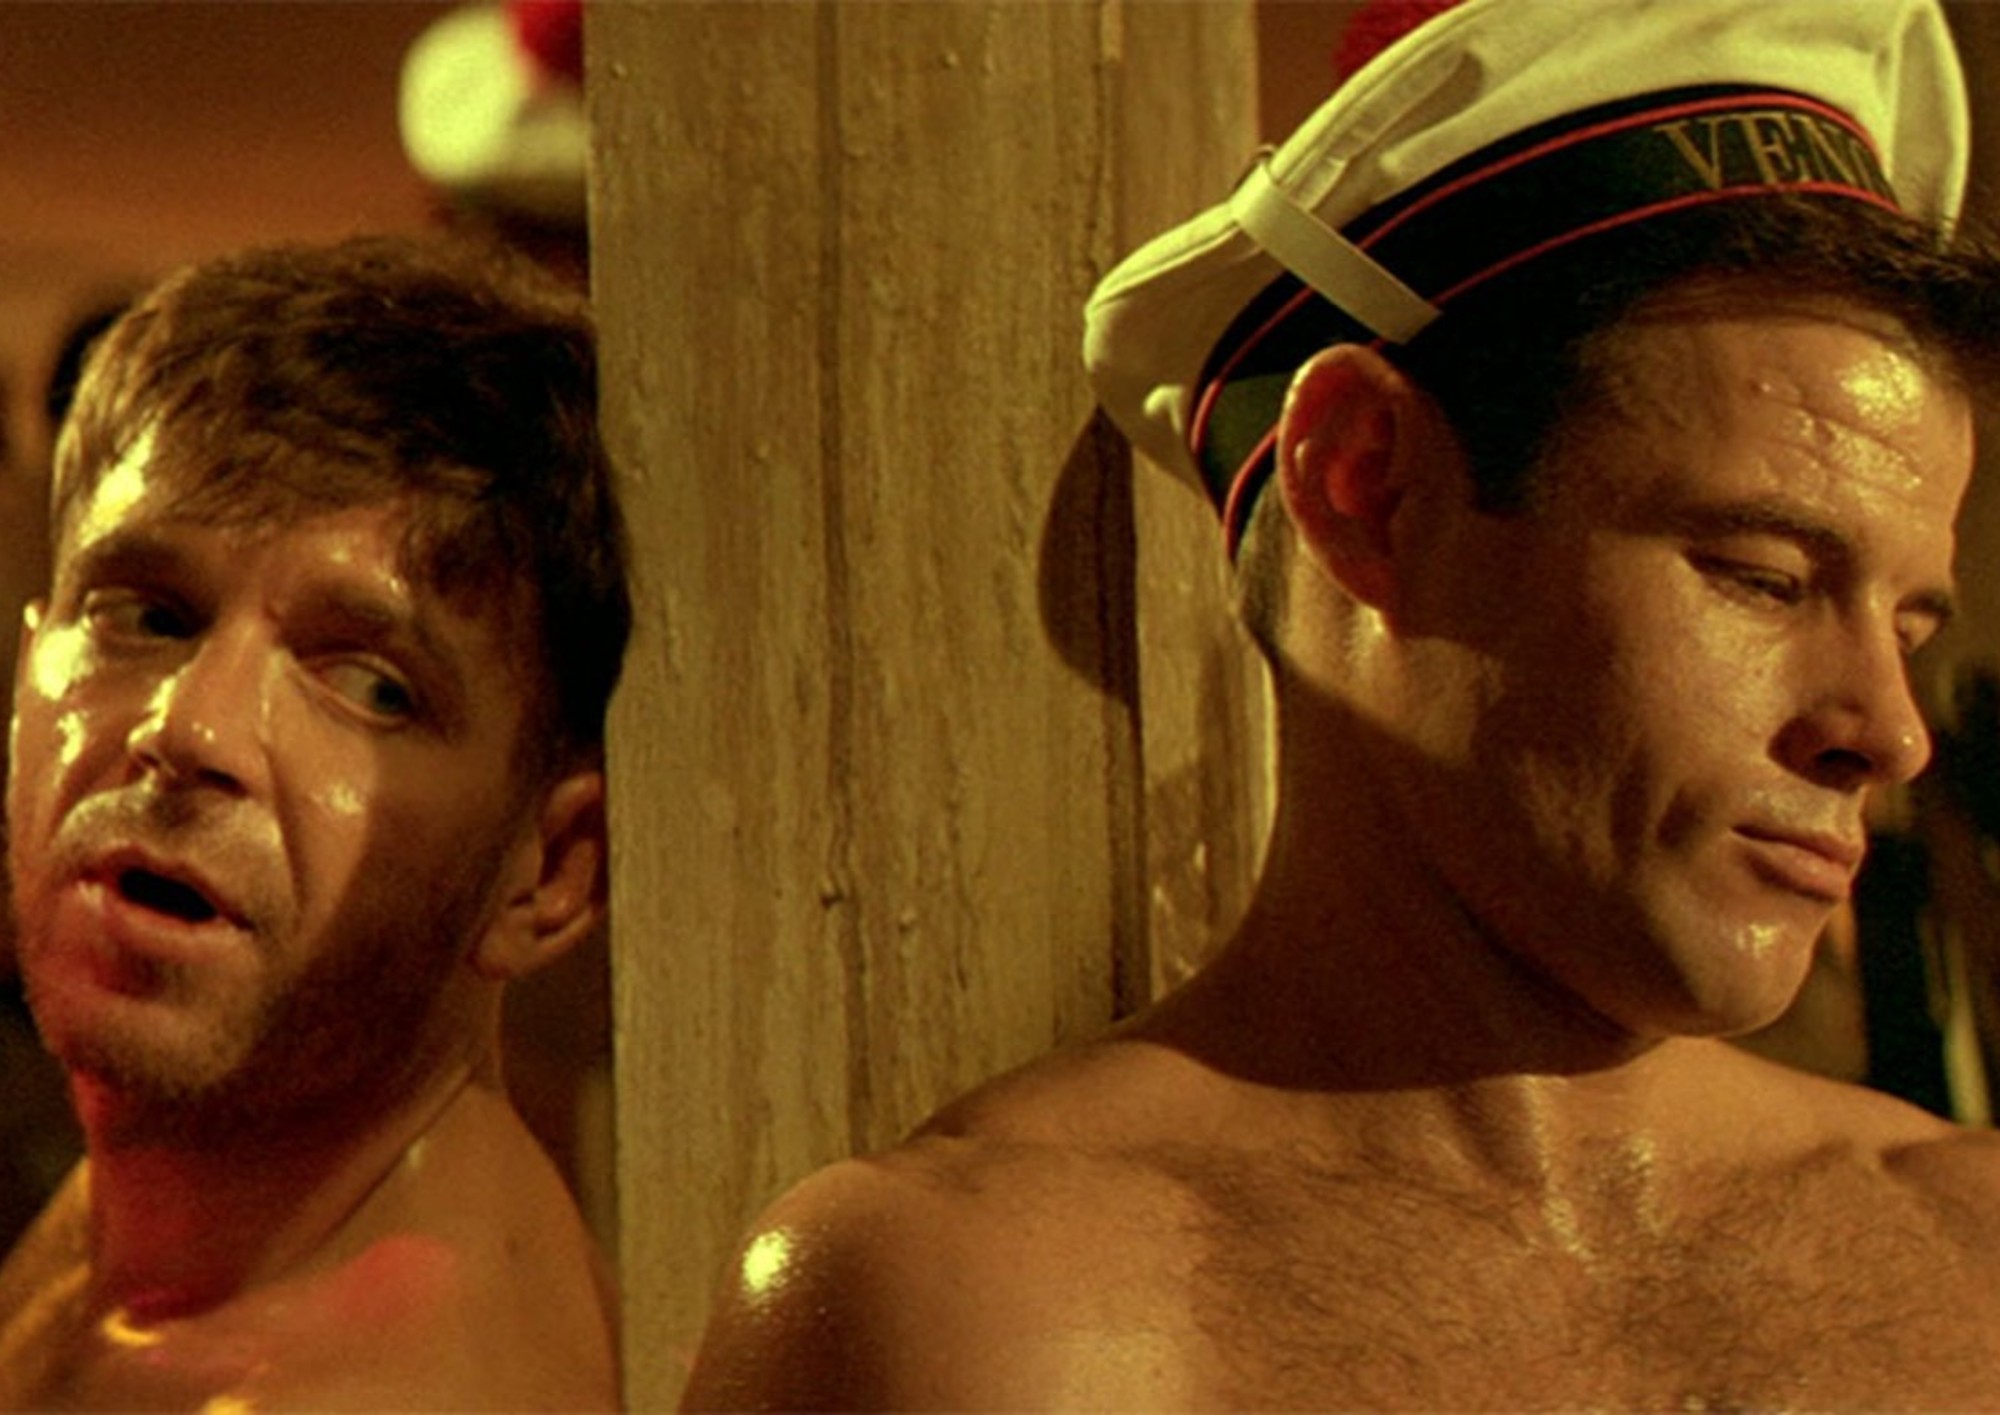 Image from the motion picture Querelle